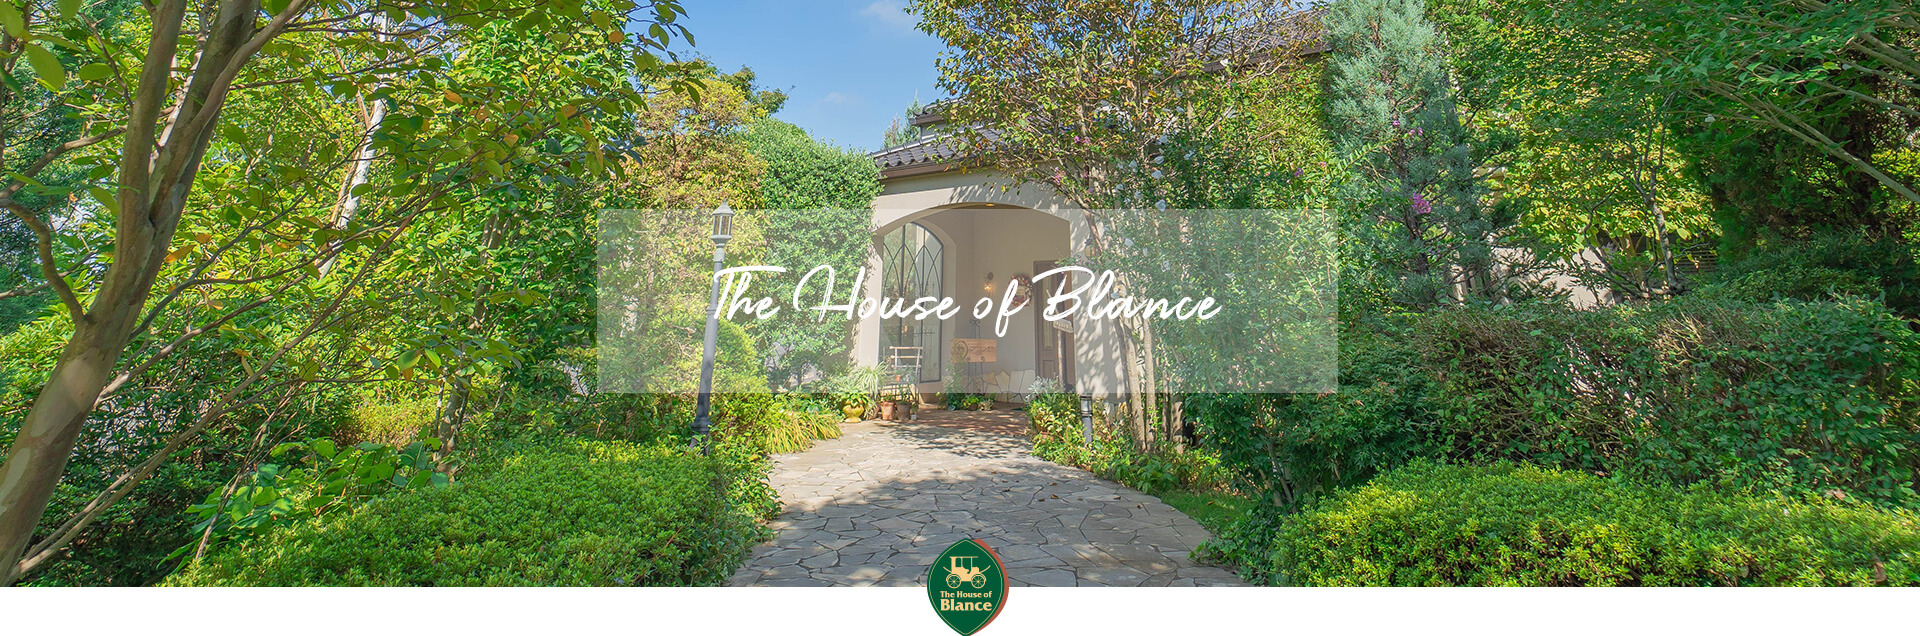 The House of Blance